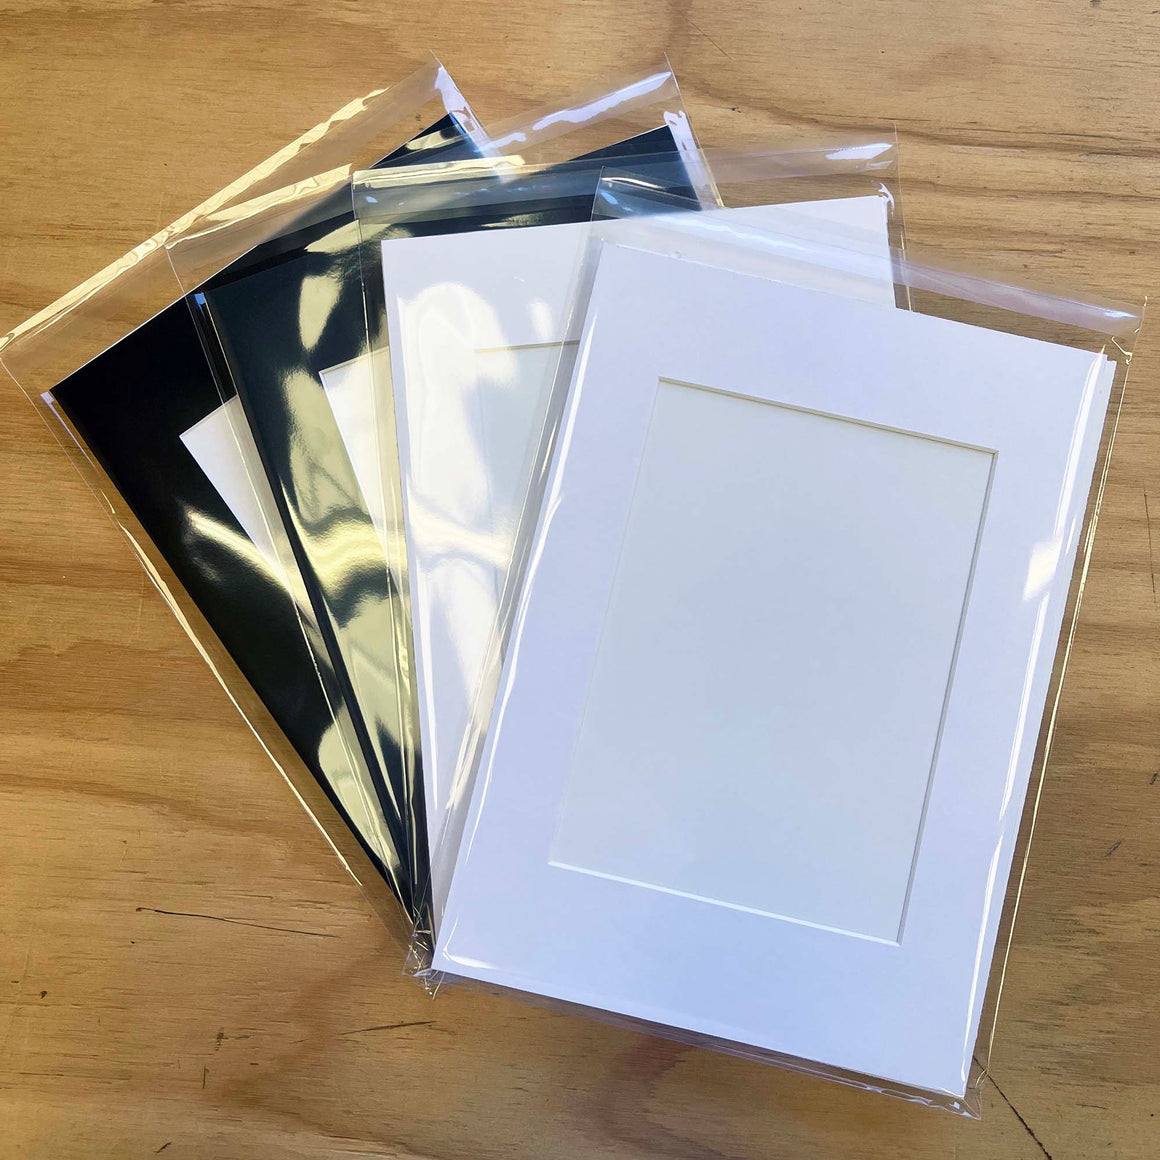 Photo Frame Matboard Insert in your choice of Bright White, Off White, Black or Charcoal Grey. Available to fit in frame size A1, A2, A3, 50x70cm or 16"x20" and window cut to suit your size artwork.